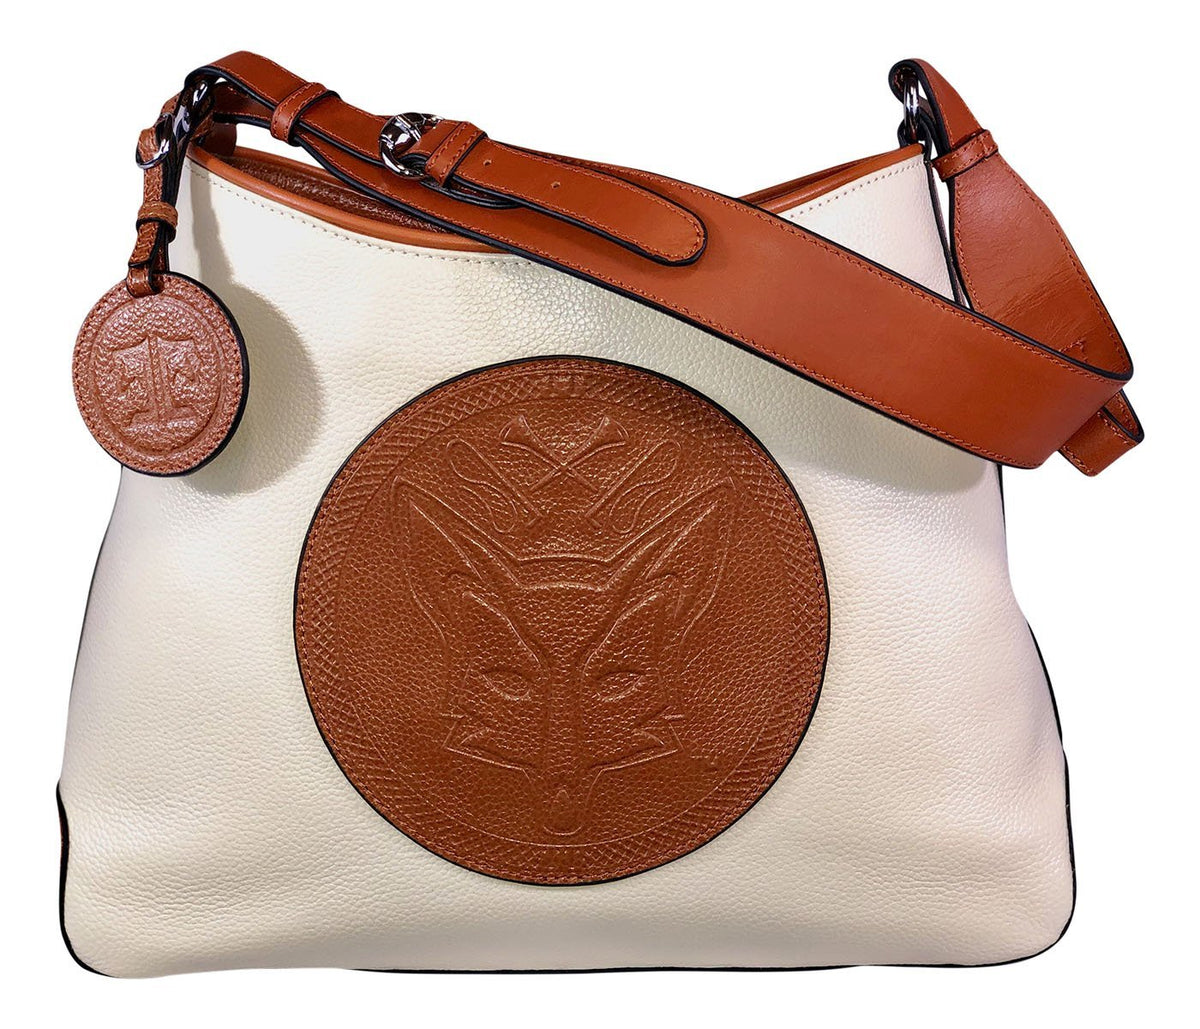 Tucker Tweed Leather Handbags Ivory/Chestnut / Foxhunting The Tweed Manor Tote: Foxhunting